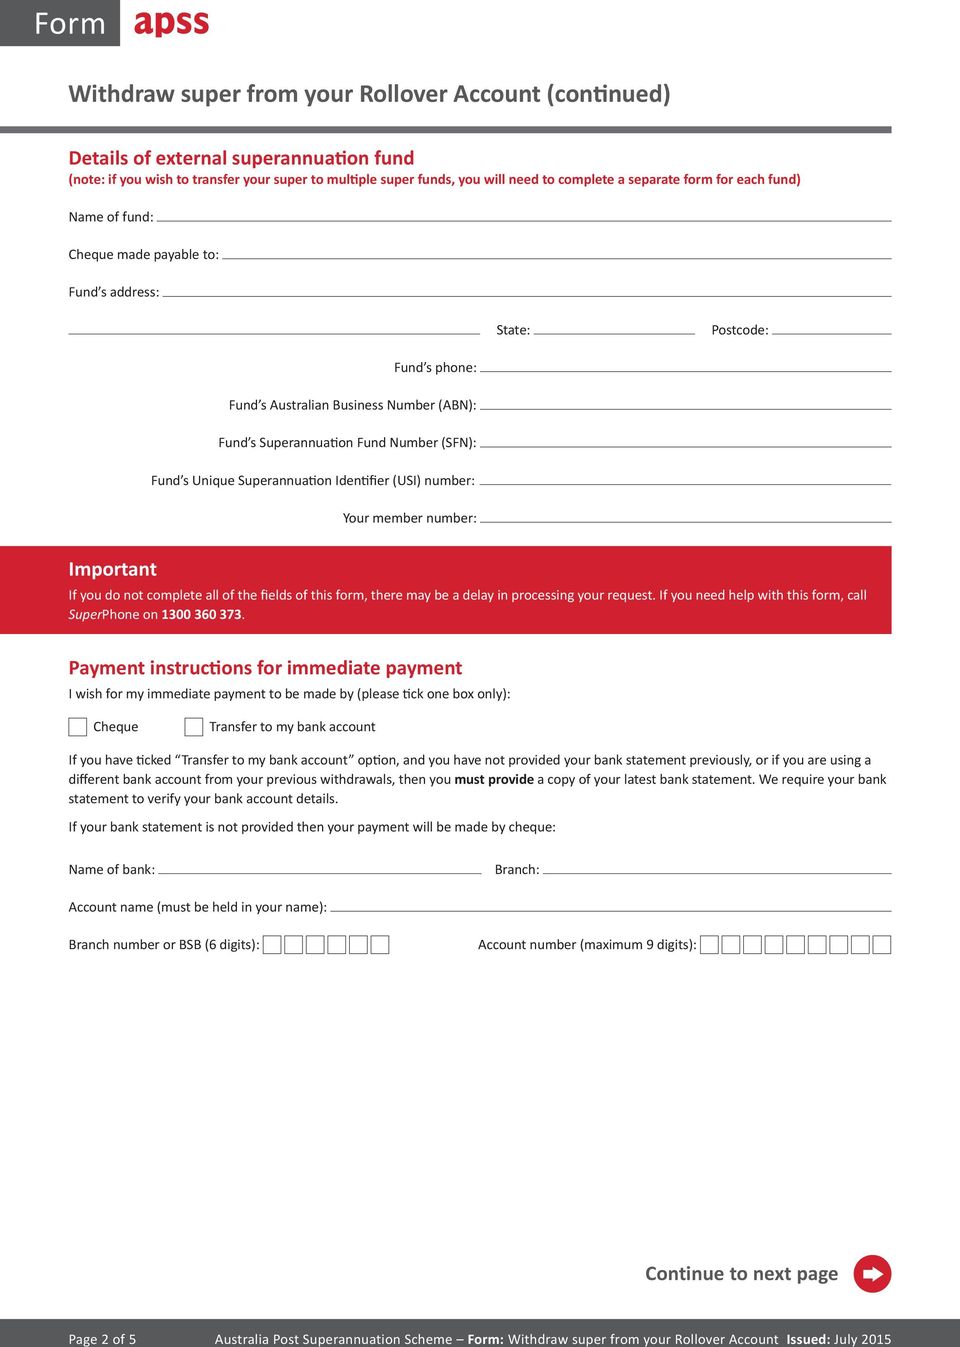 number: If you do not complete all of the fields of this form, there may be a delay in processing your request. If you need help with this form, call SuperPhone on 1300 360 373.